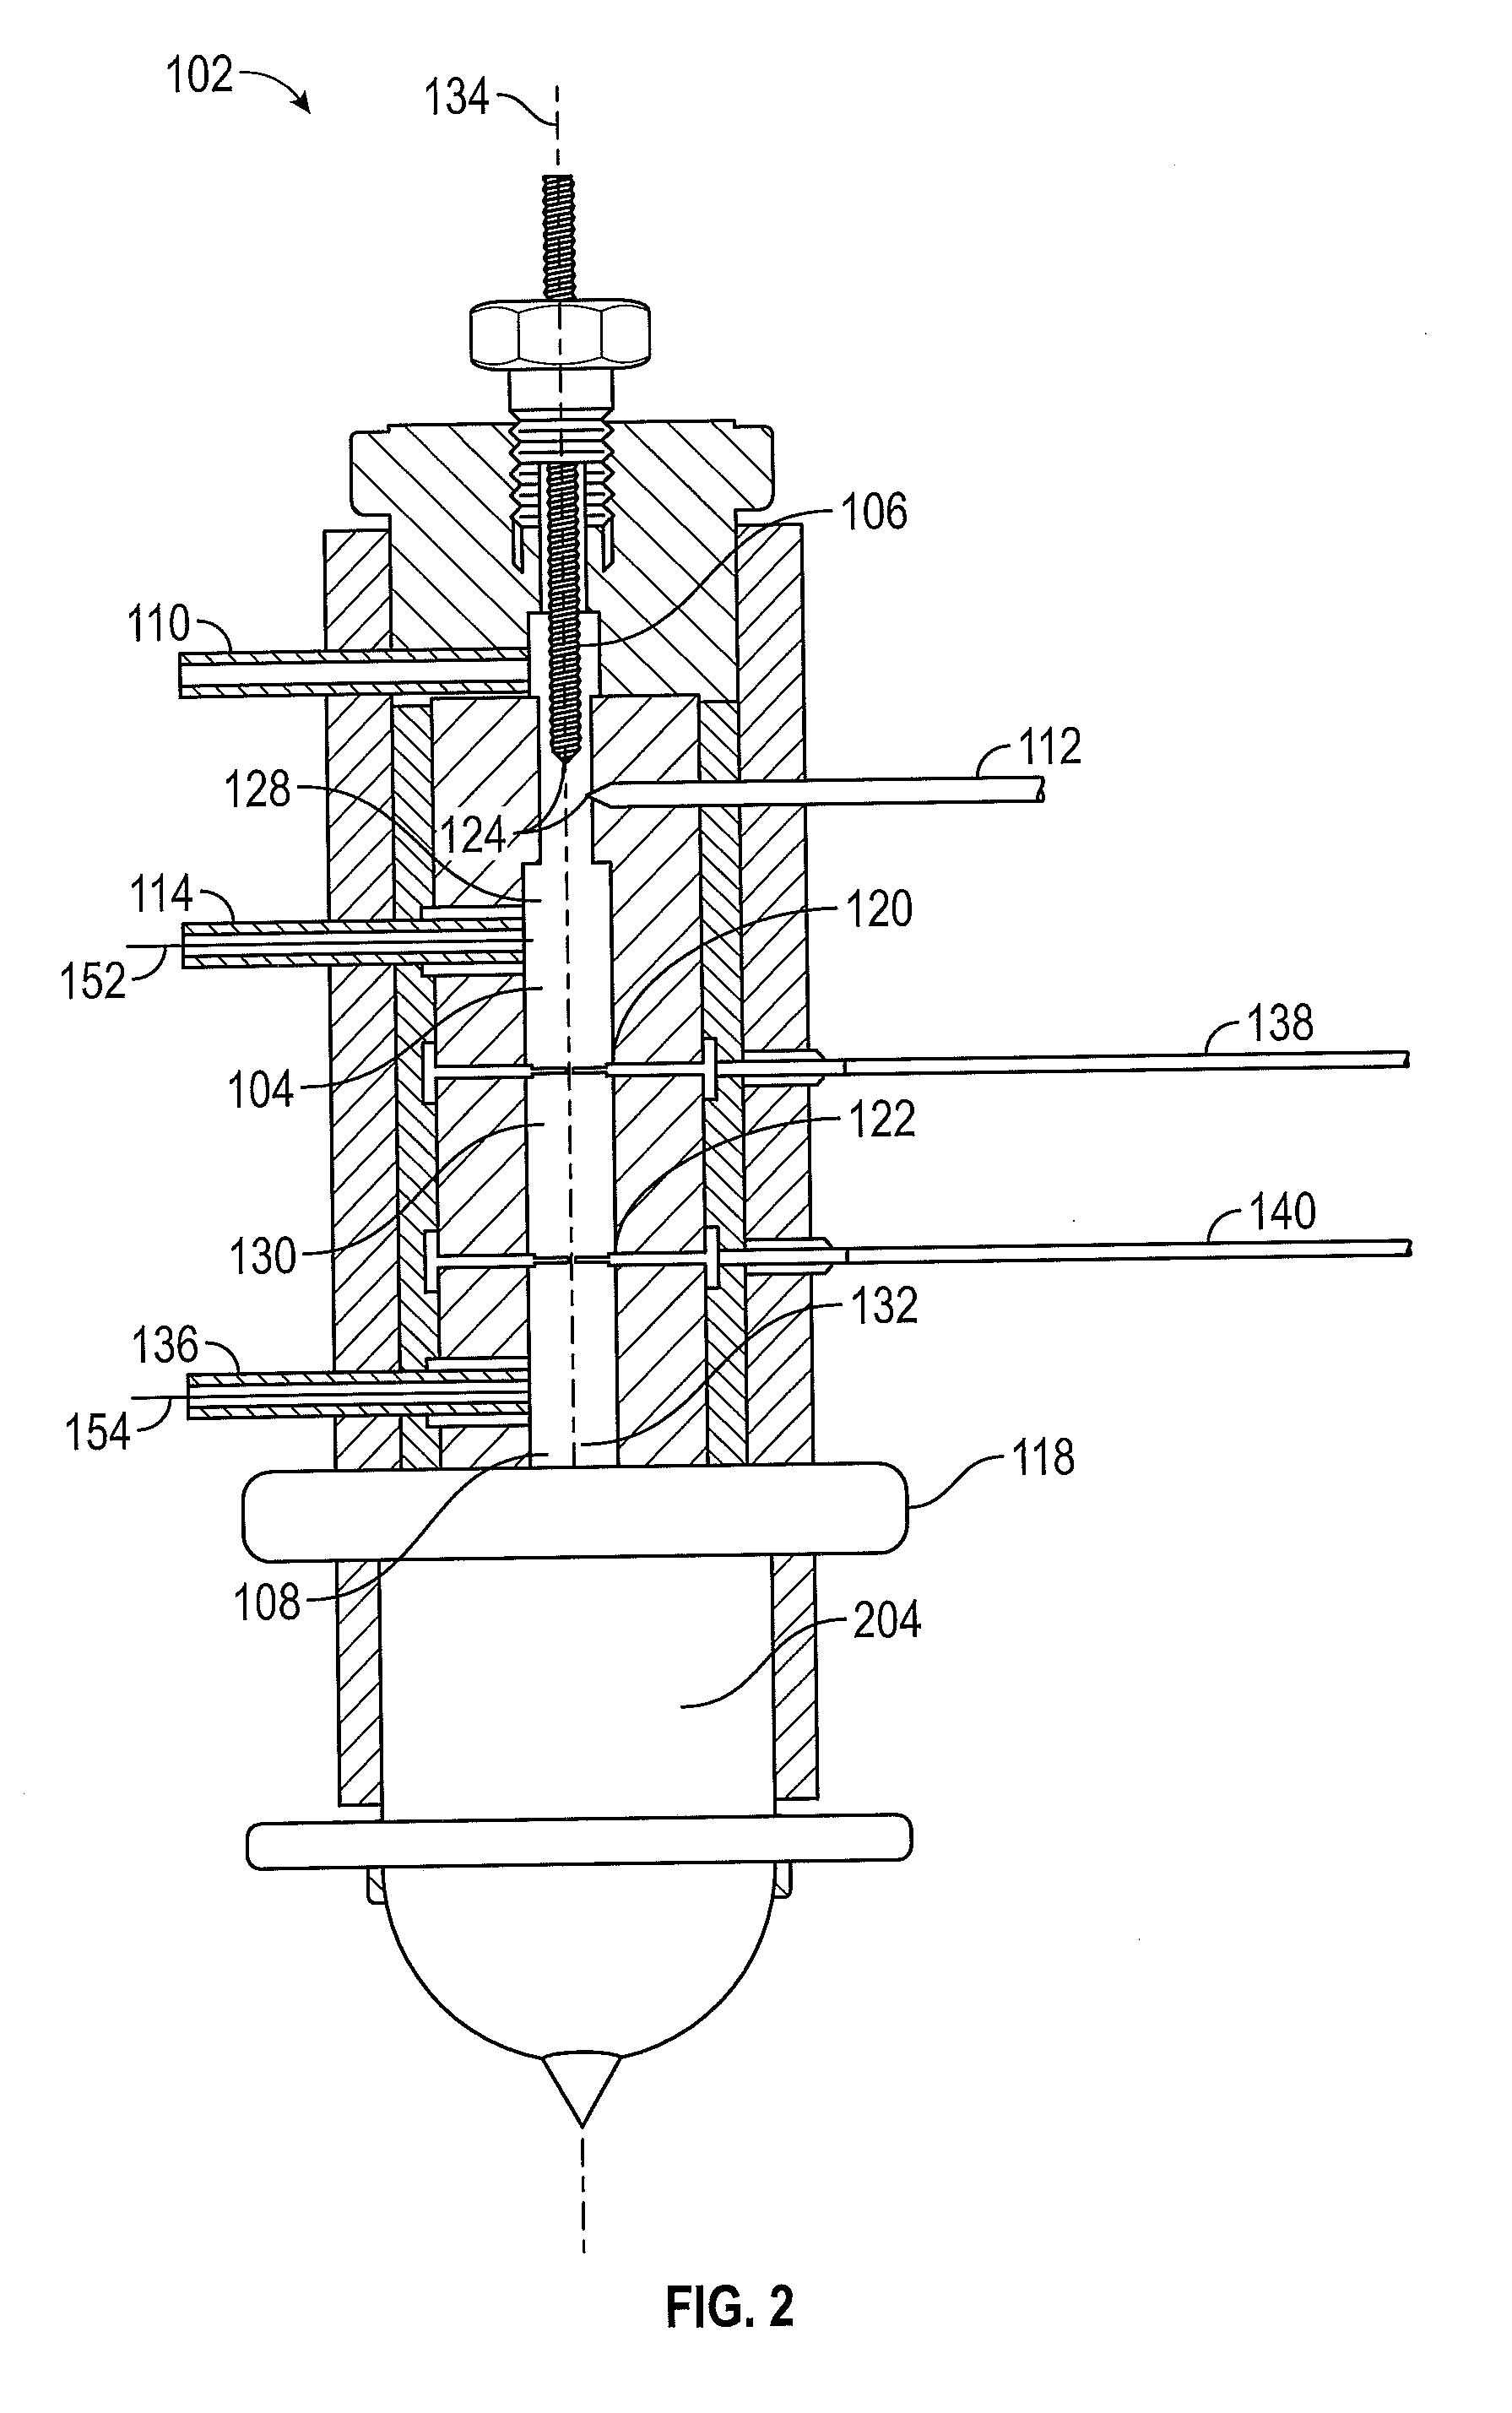 Photo ionization detector for gas chromatography having at least two separately ionizing sources